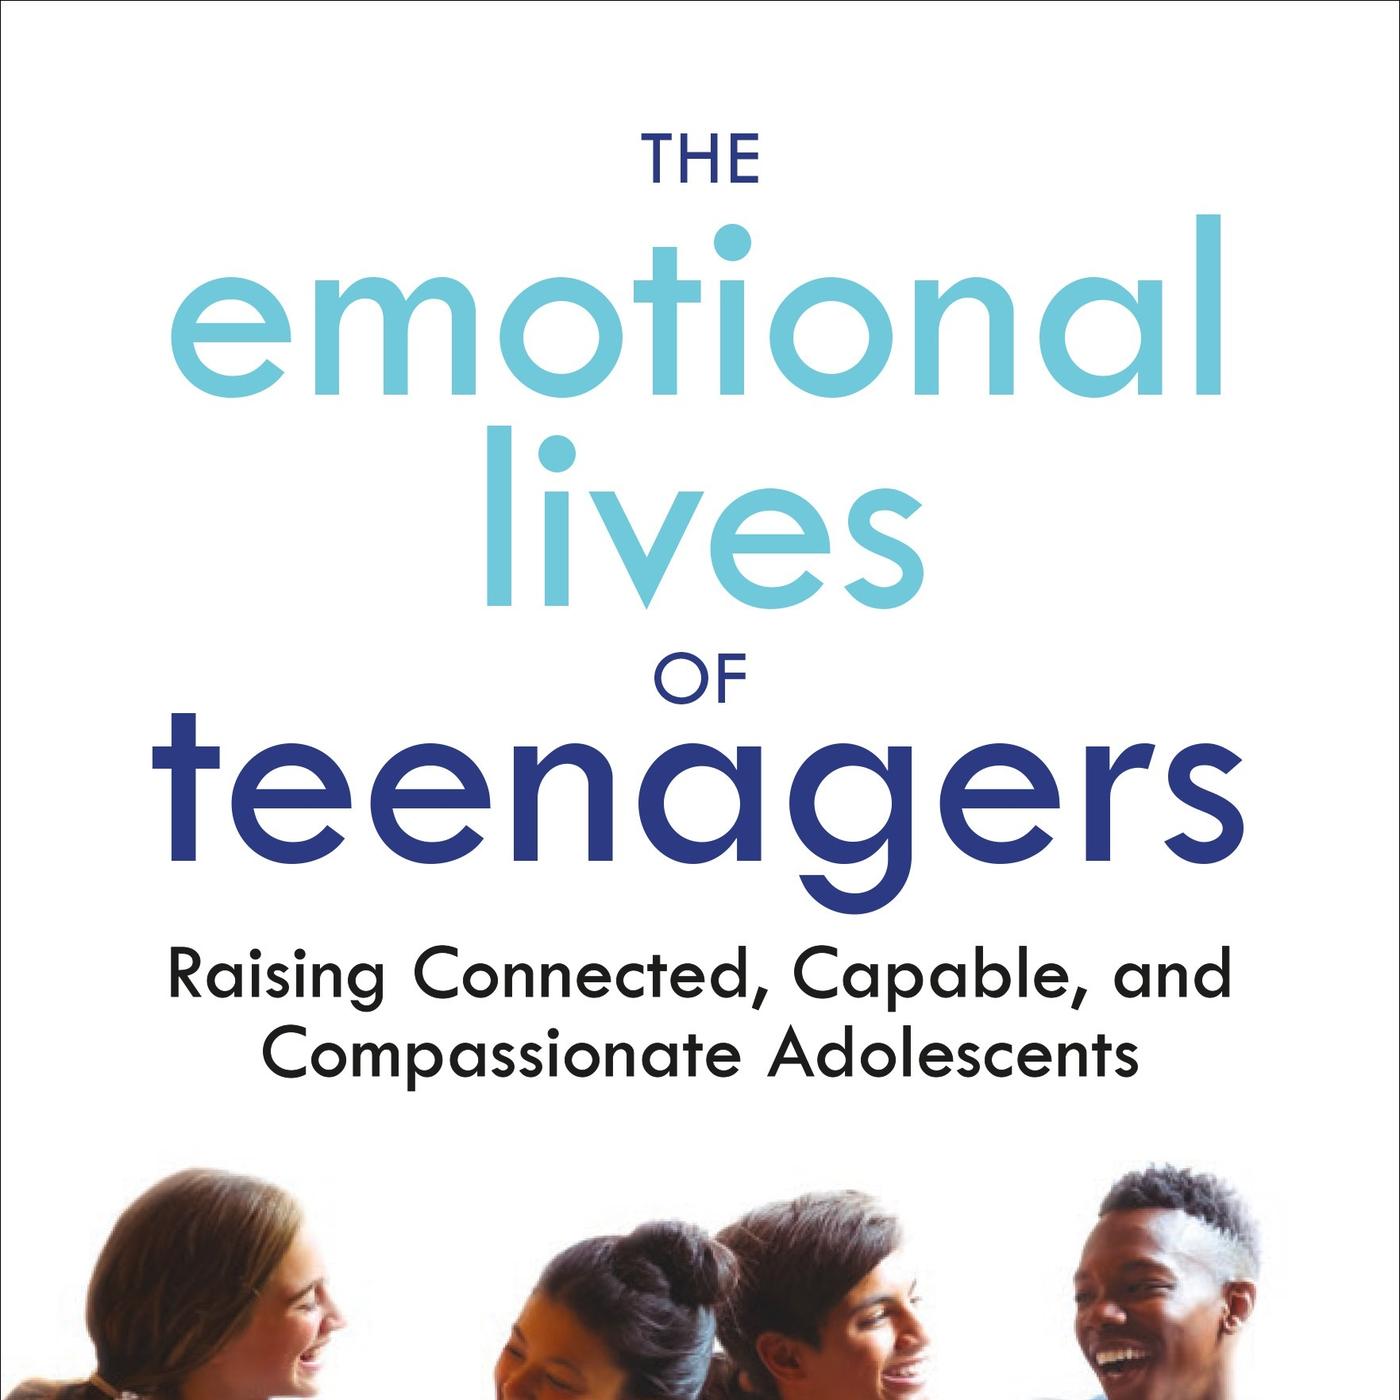 A New Book Offers A Guide Into the Emotional Lives of Teenagers